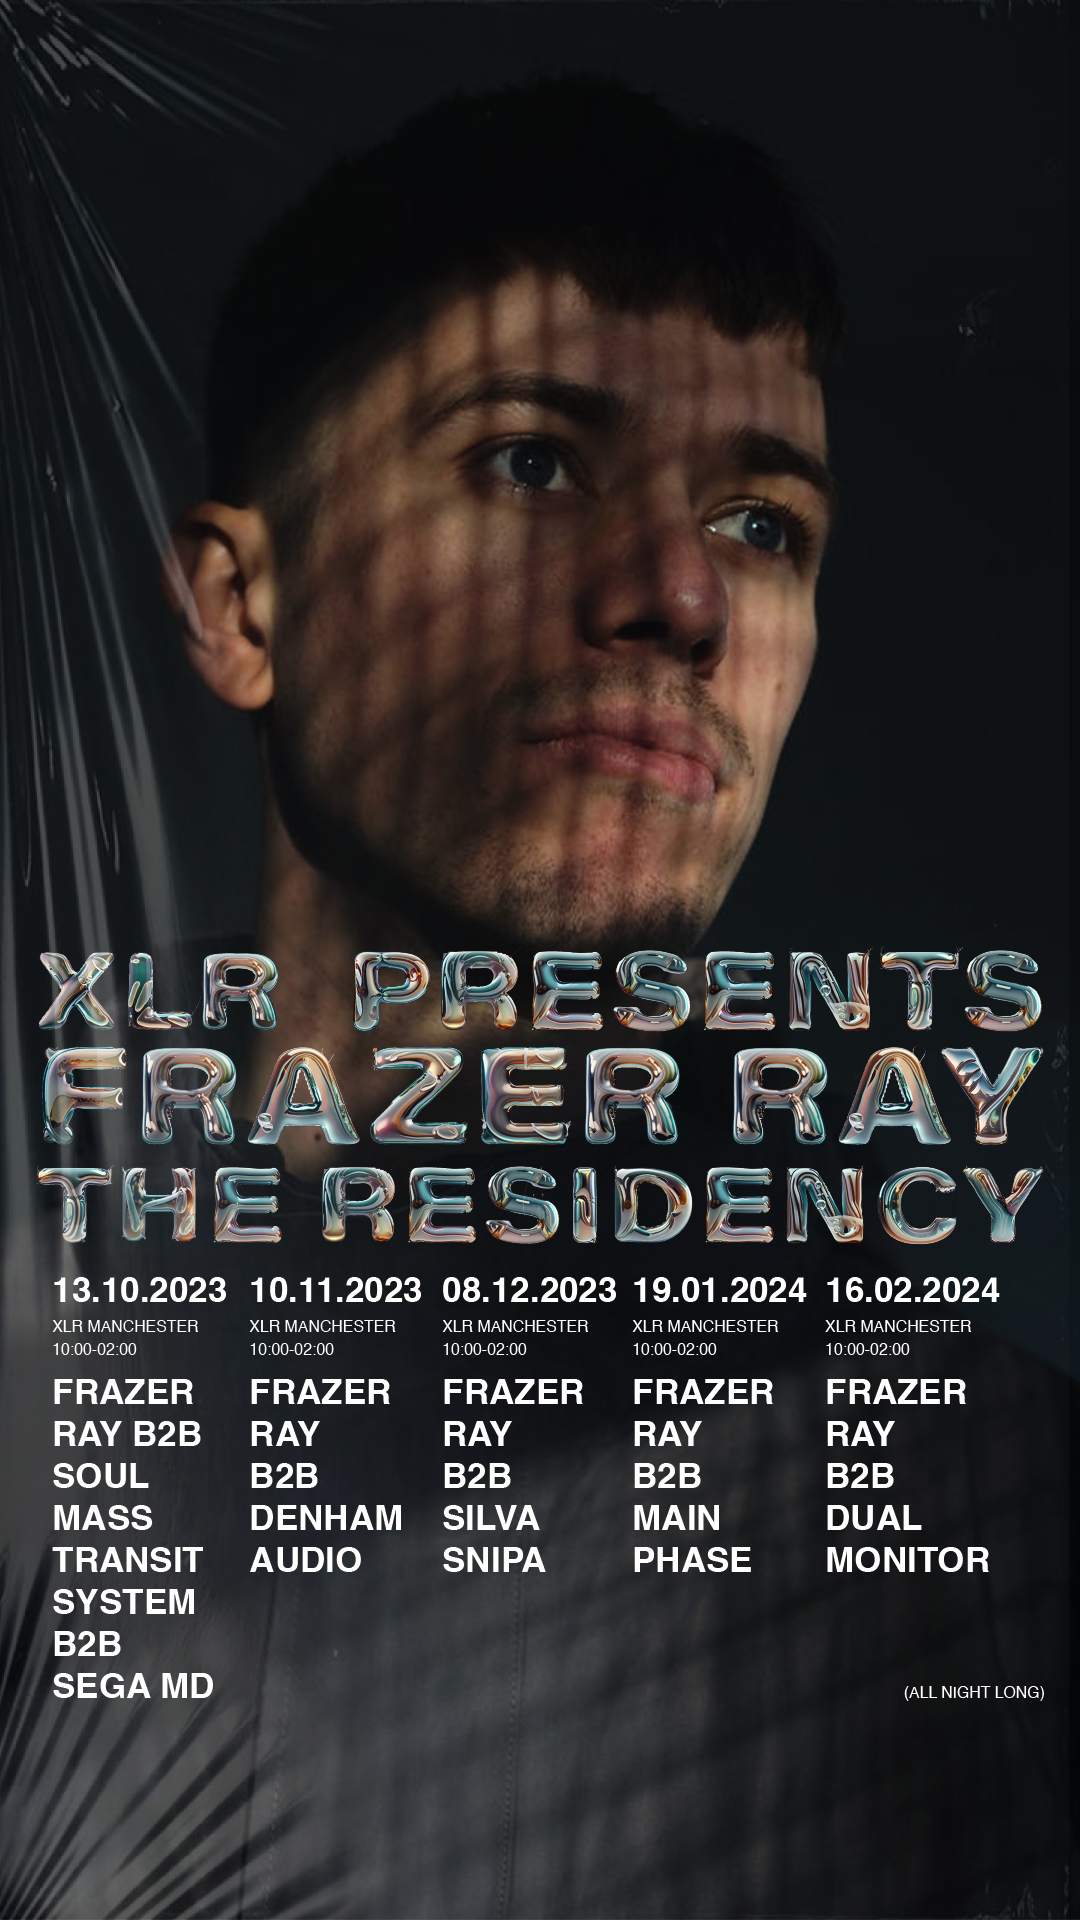 Frazer Ray Residency with Dual Monitor - フライヤー表